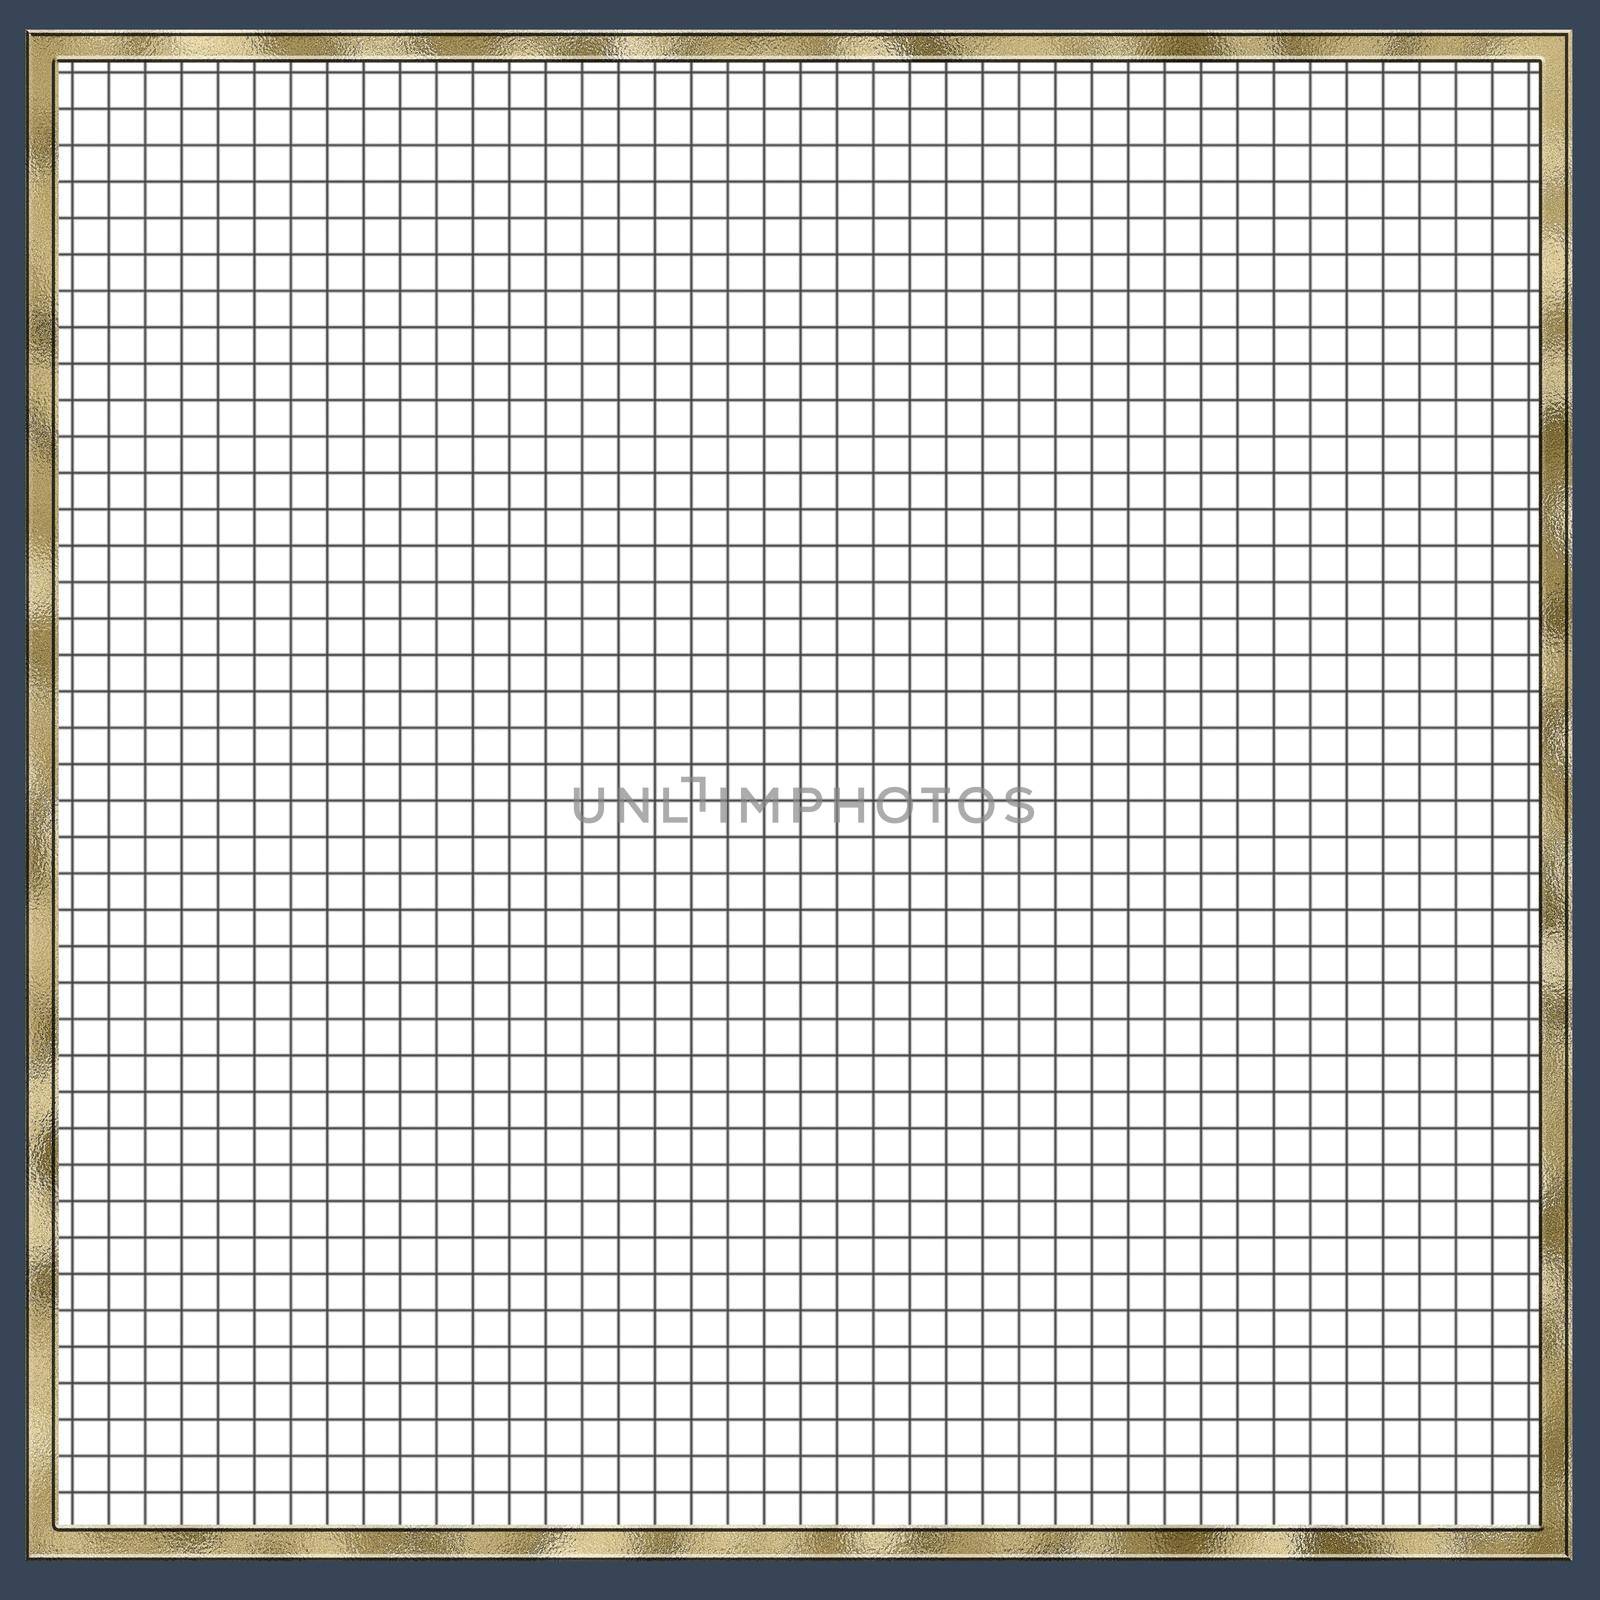 Squared grid paper by NelliPolk